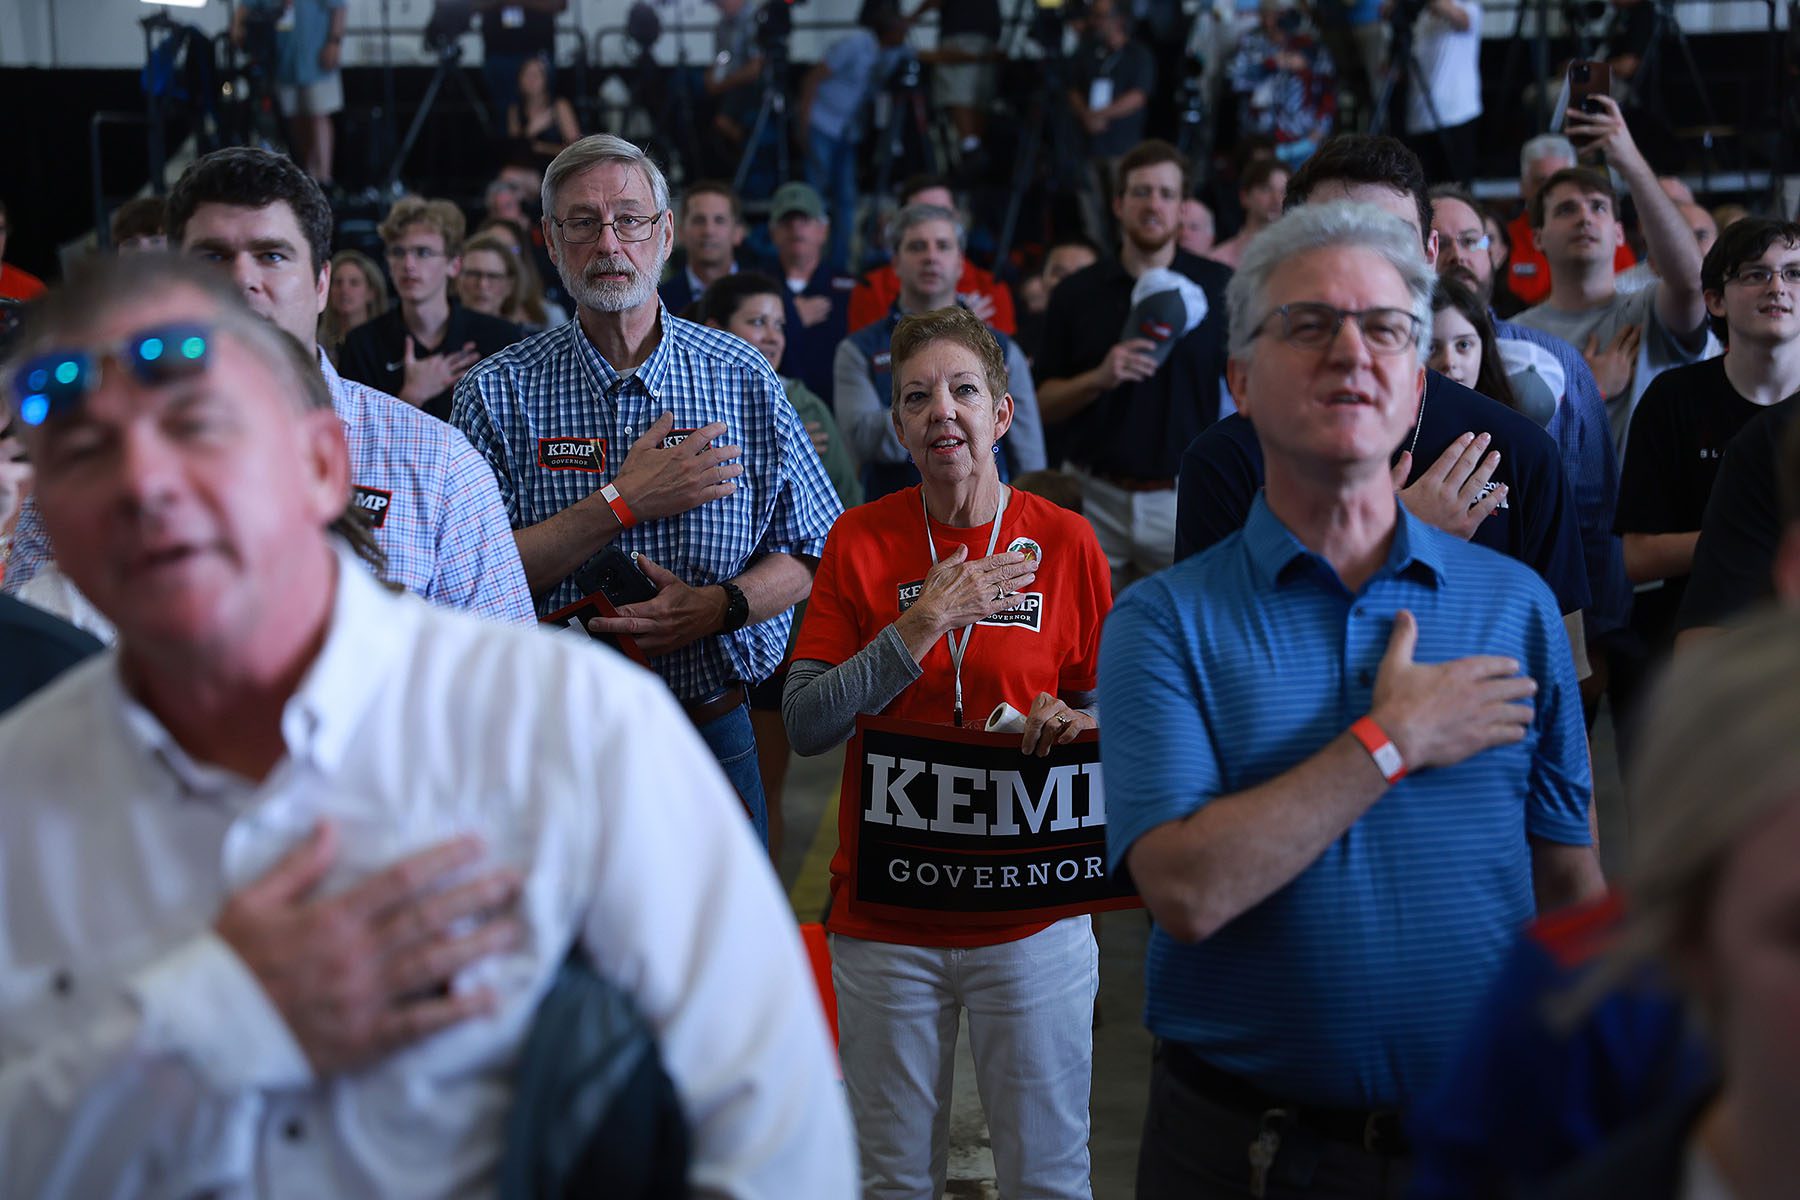 Attendees hold their hands on their hearts while they recite the Pledge of Allegiance before a campaign event.